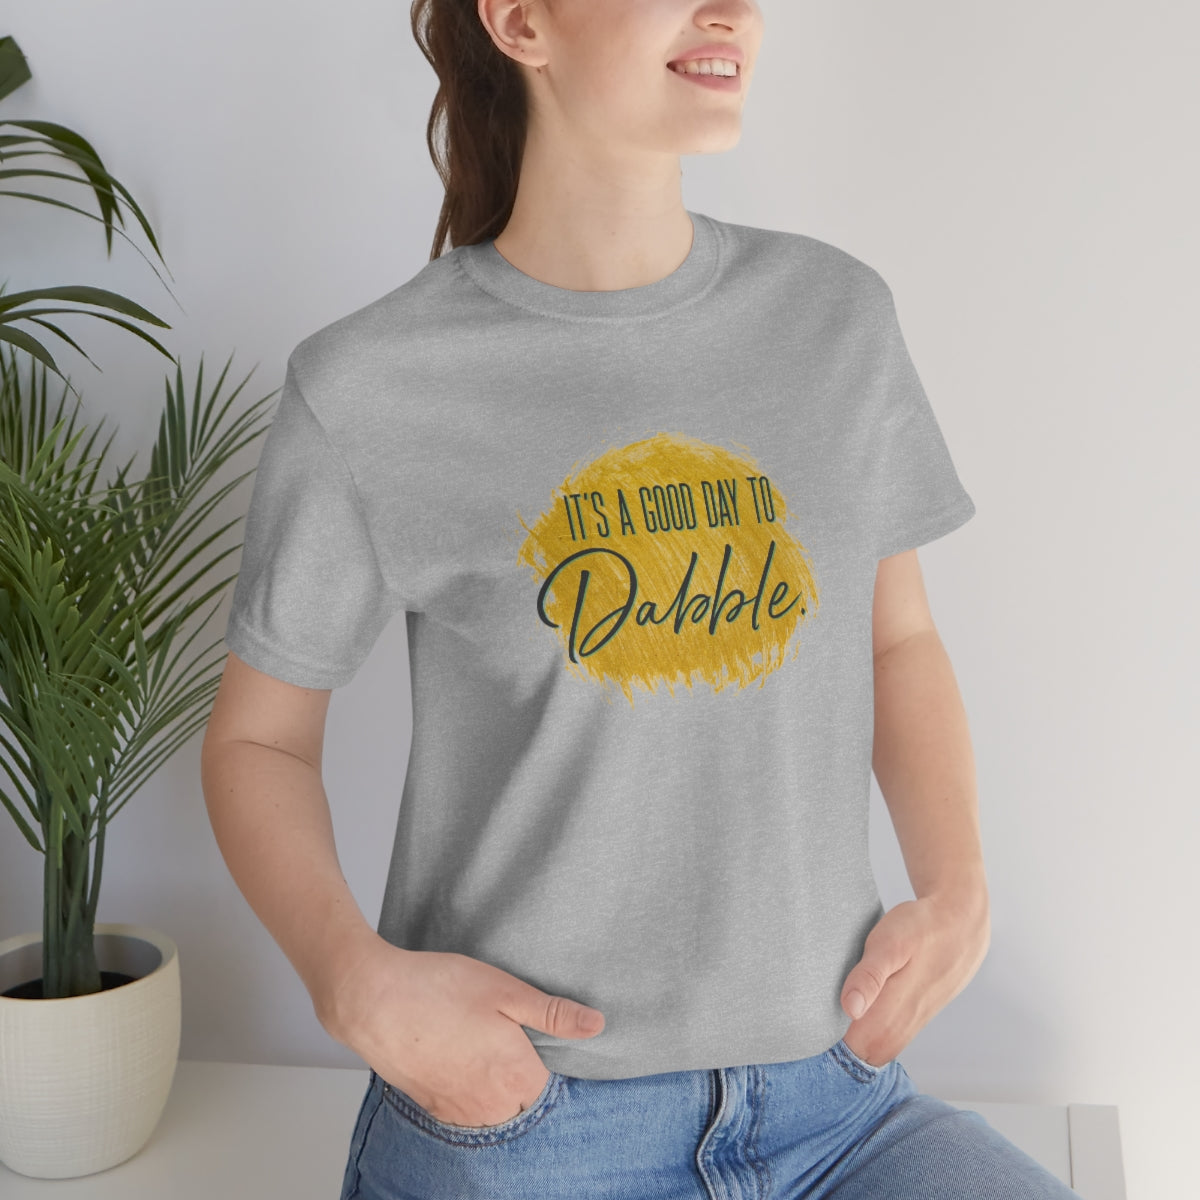 It's a good day to Dabble Short Sleeve Tee